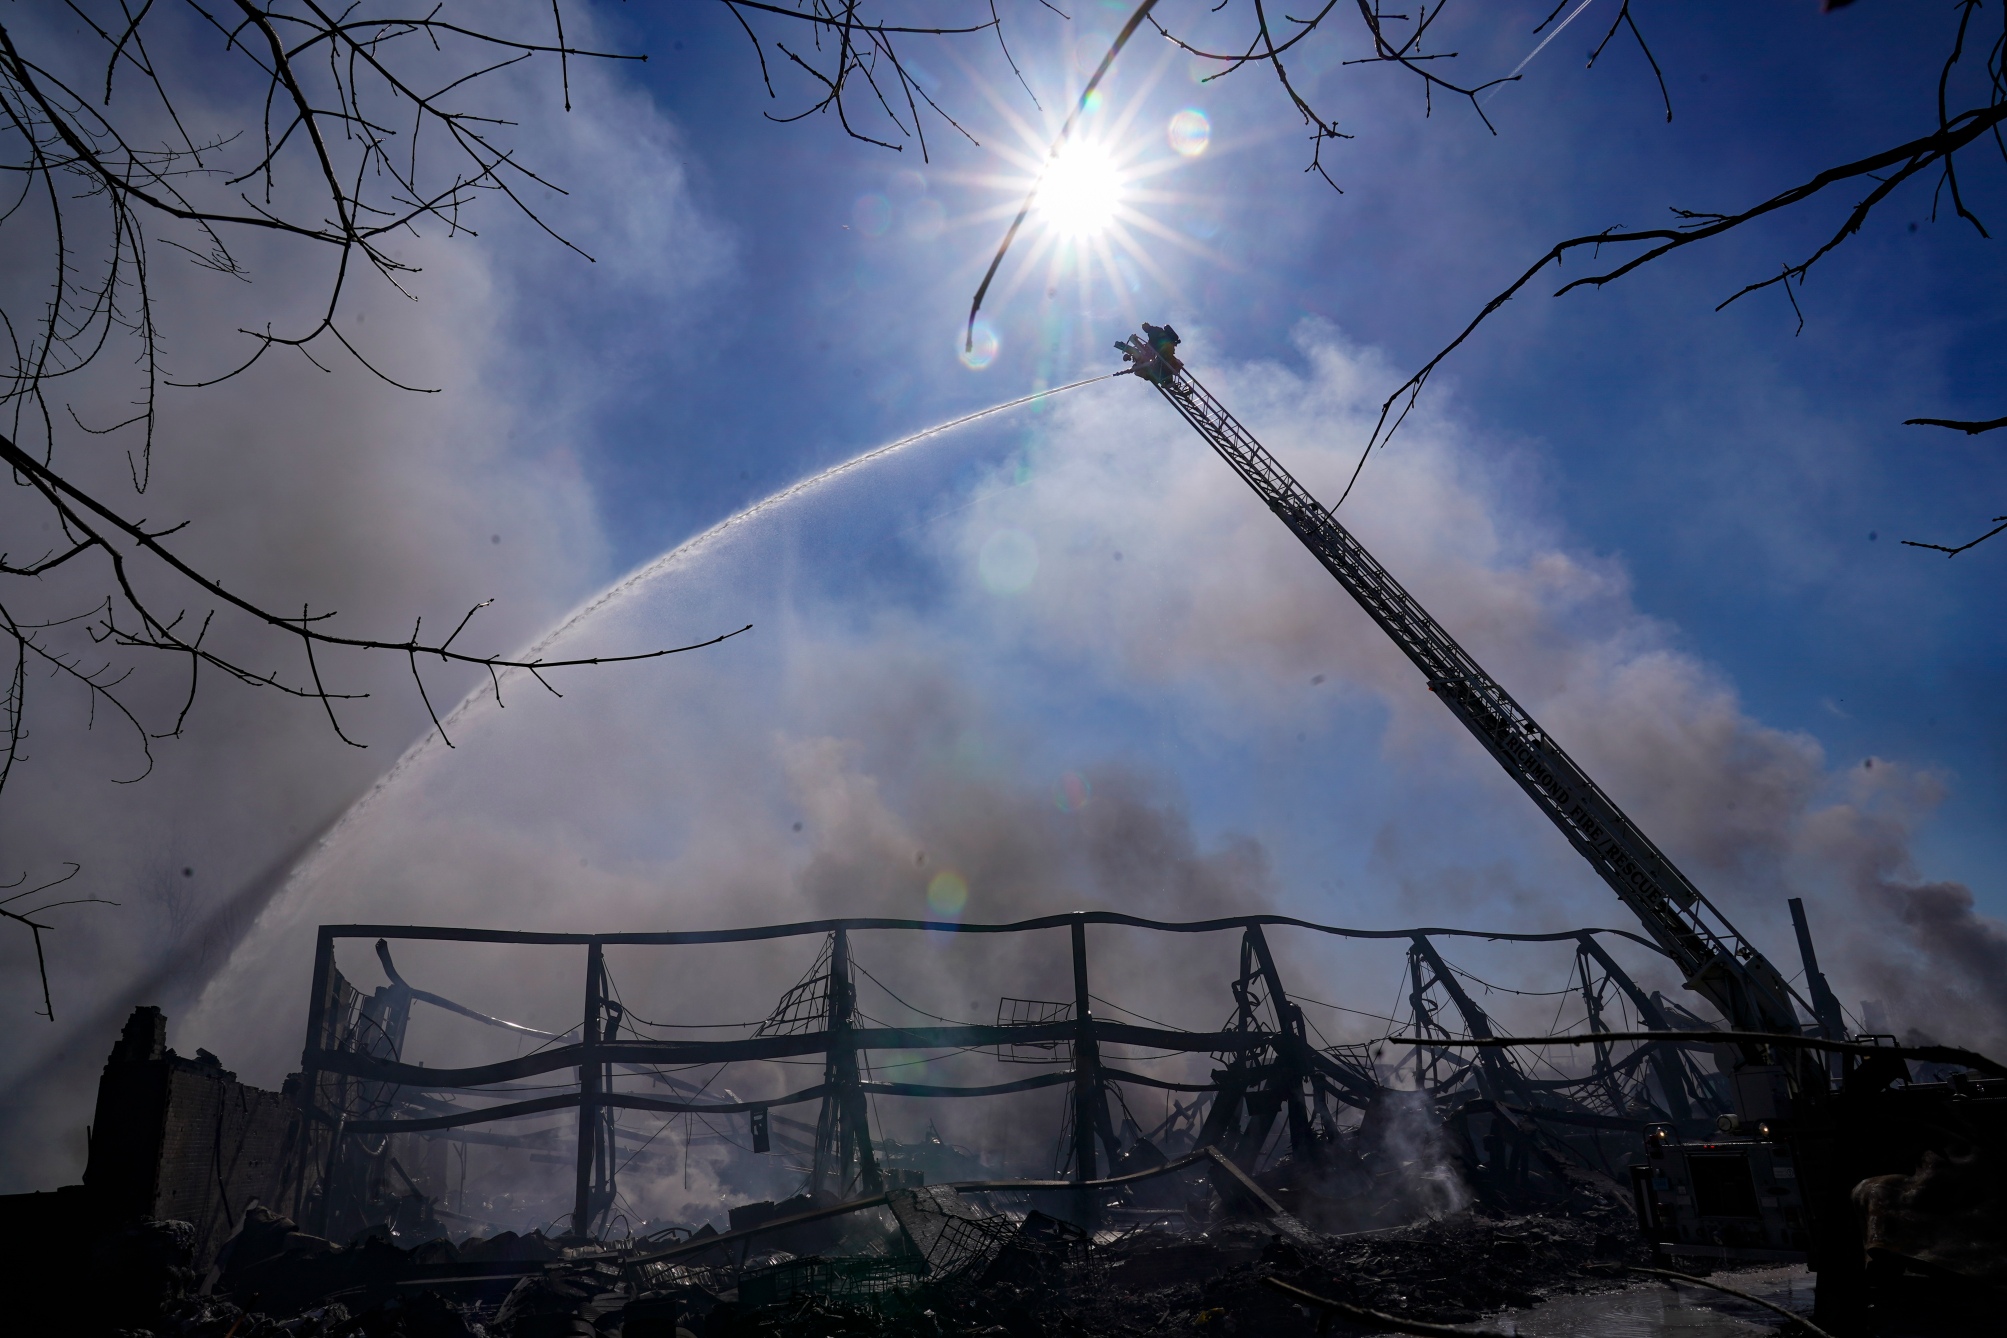 Firefighters pour water on an industrial fire in Richmond, Ind. on Thursday, April 13, 2023. Several fires that started burning Tuesday afternoon were still burning within approximately 14 acres of various types of plastics stored inside and outside the buildings of the former factory site.  (AP Photo/Michael Conroy)